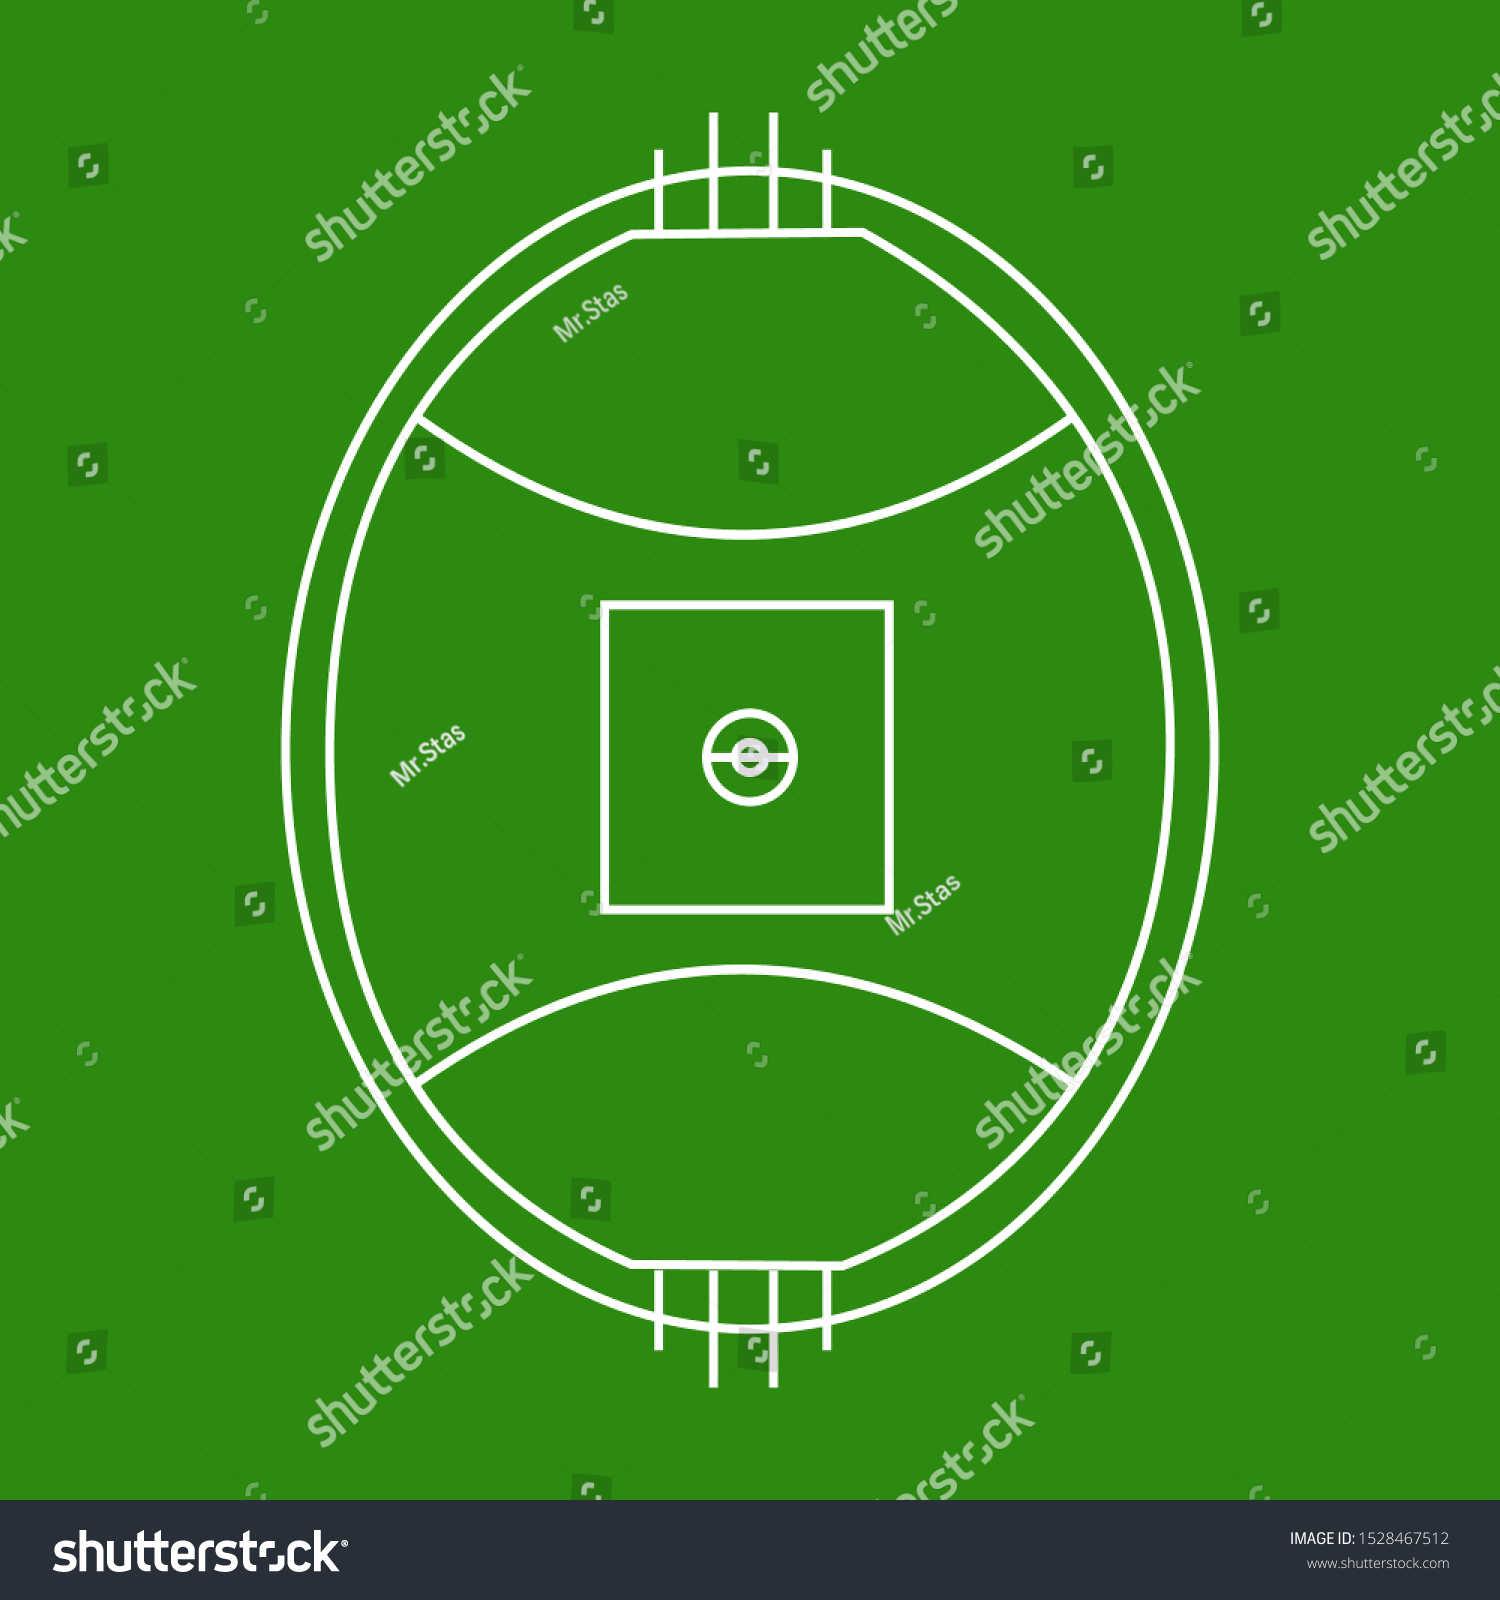 Football Field Isolated On Green Stock Vector (Royalty 1528467512